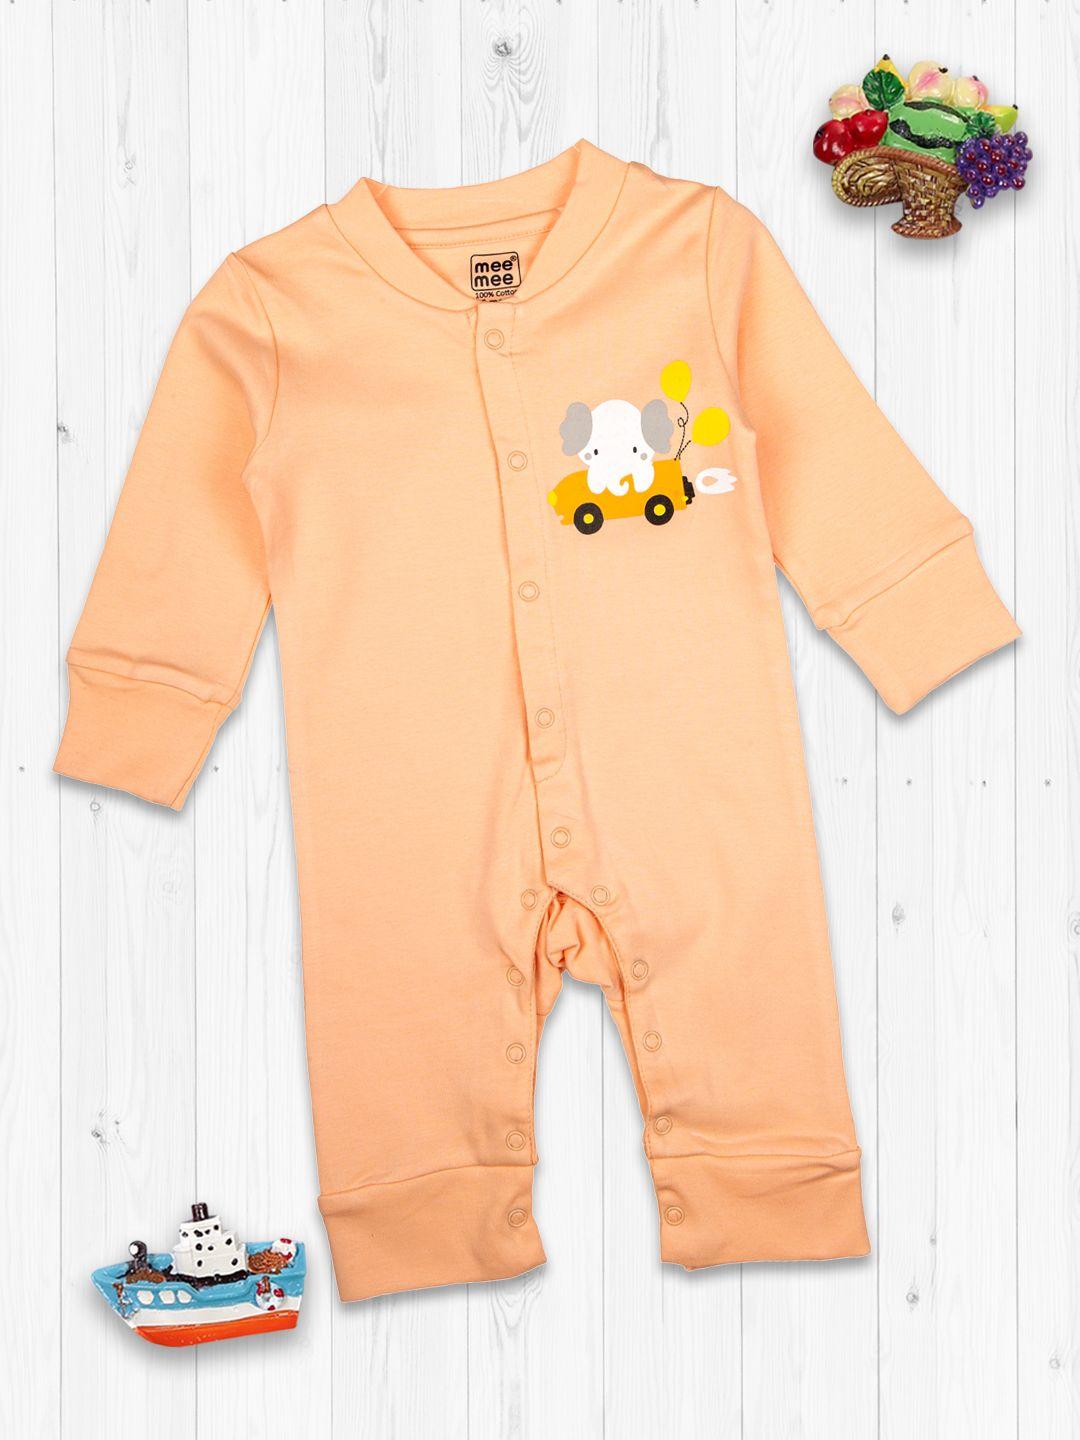 meemee boys peach colored solid rompers